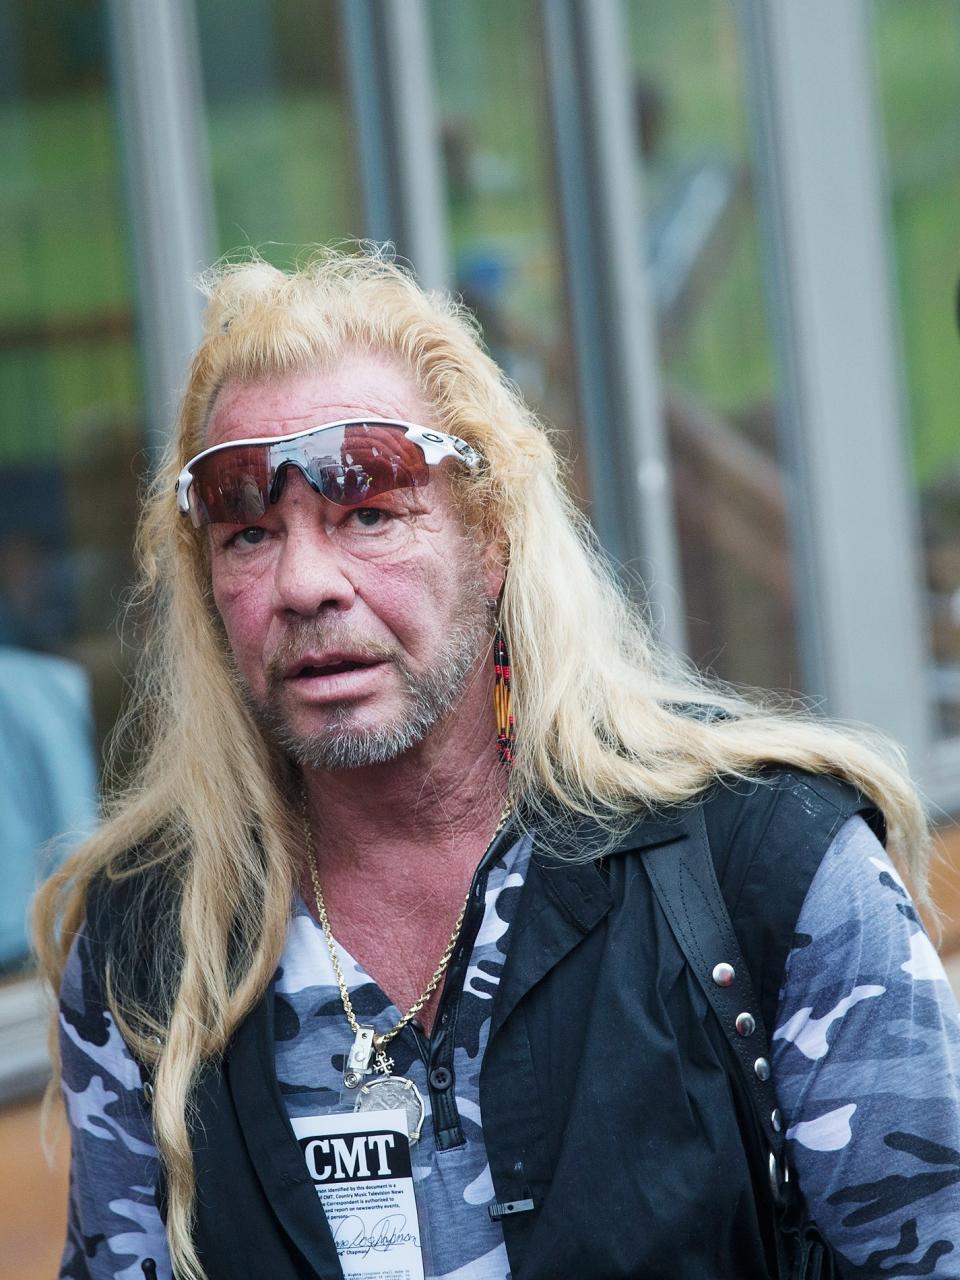 Duane Chapman filming a segment of his television show during a news conference with Governor Andrew Cuomo on June 28, 2015 in Malone, NY.